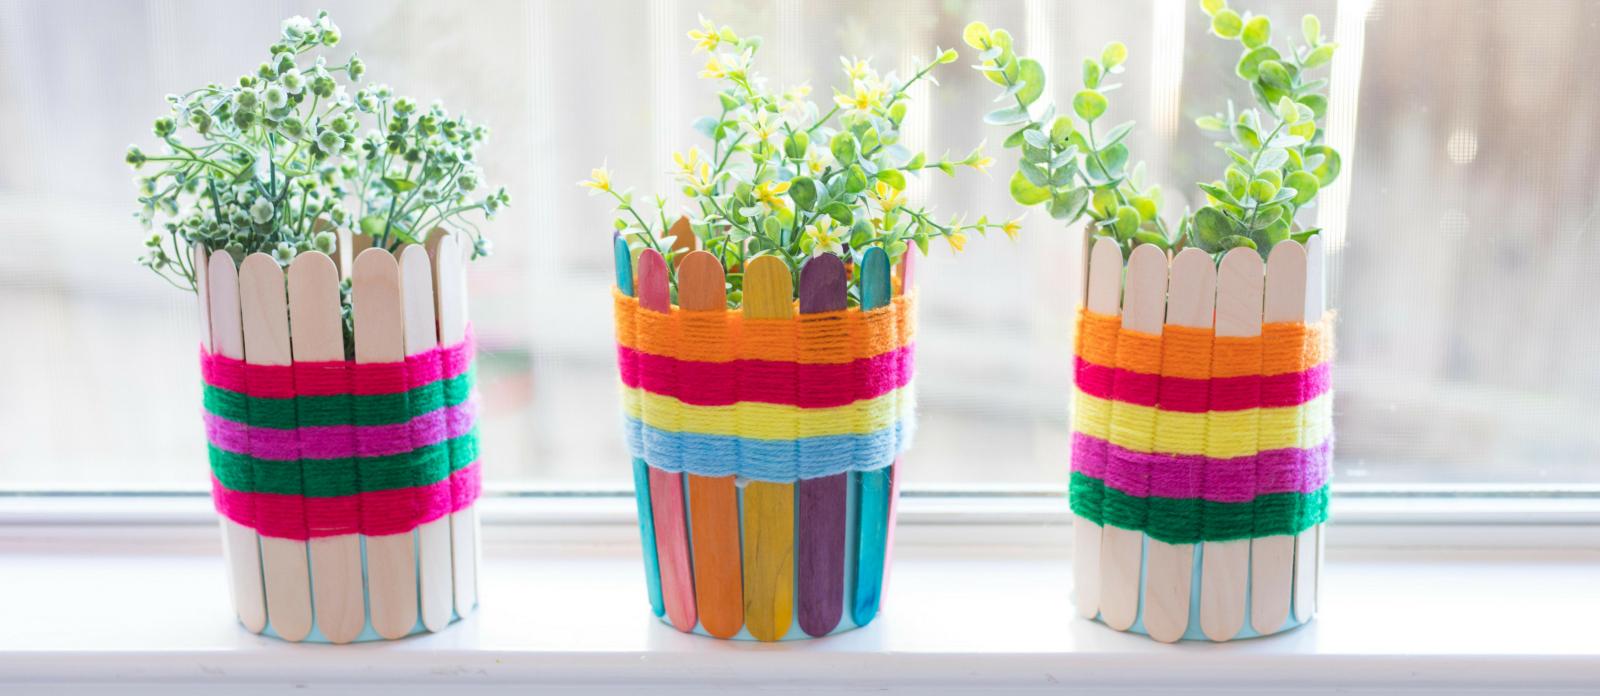 DIY Colored Popsicle Sticks, How to make Colored Craft Sticks at  home